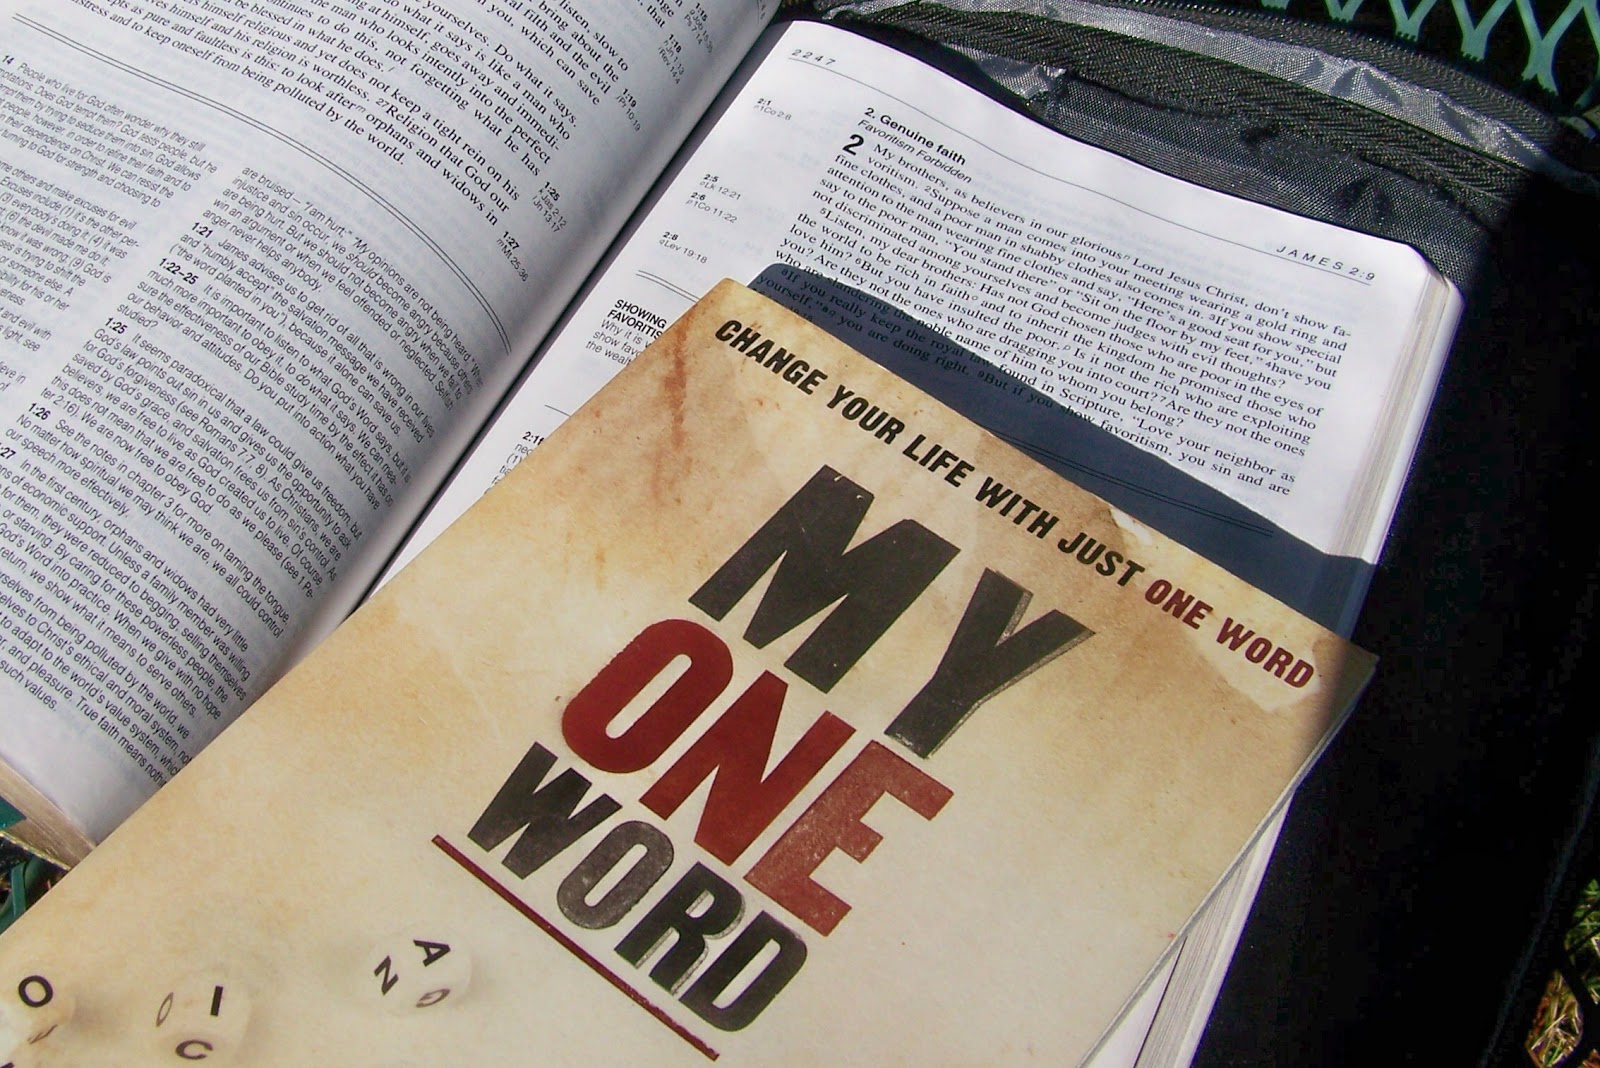 my one word book with bible